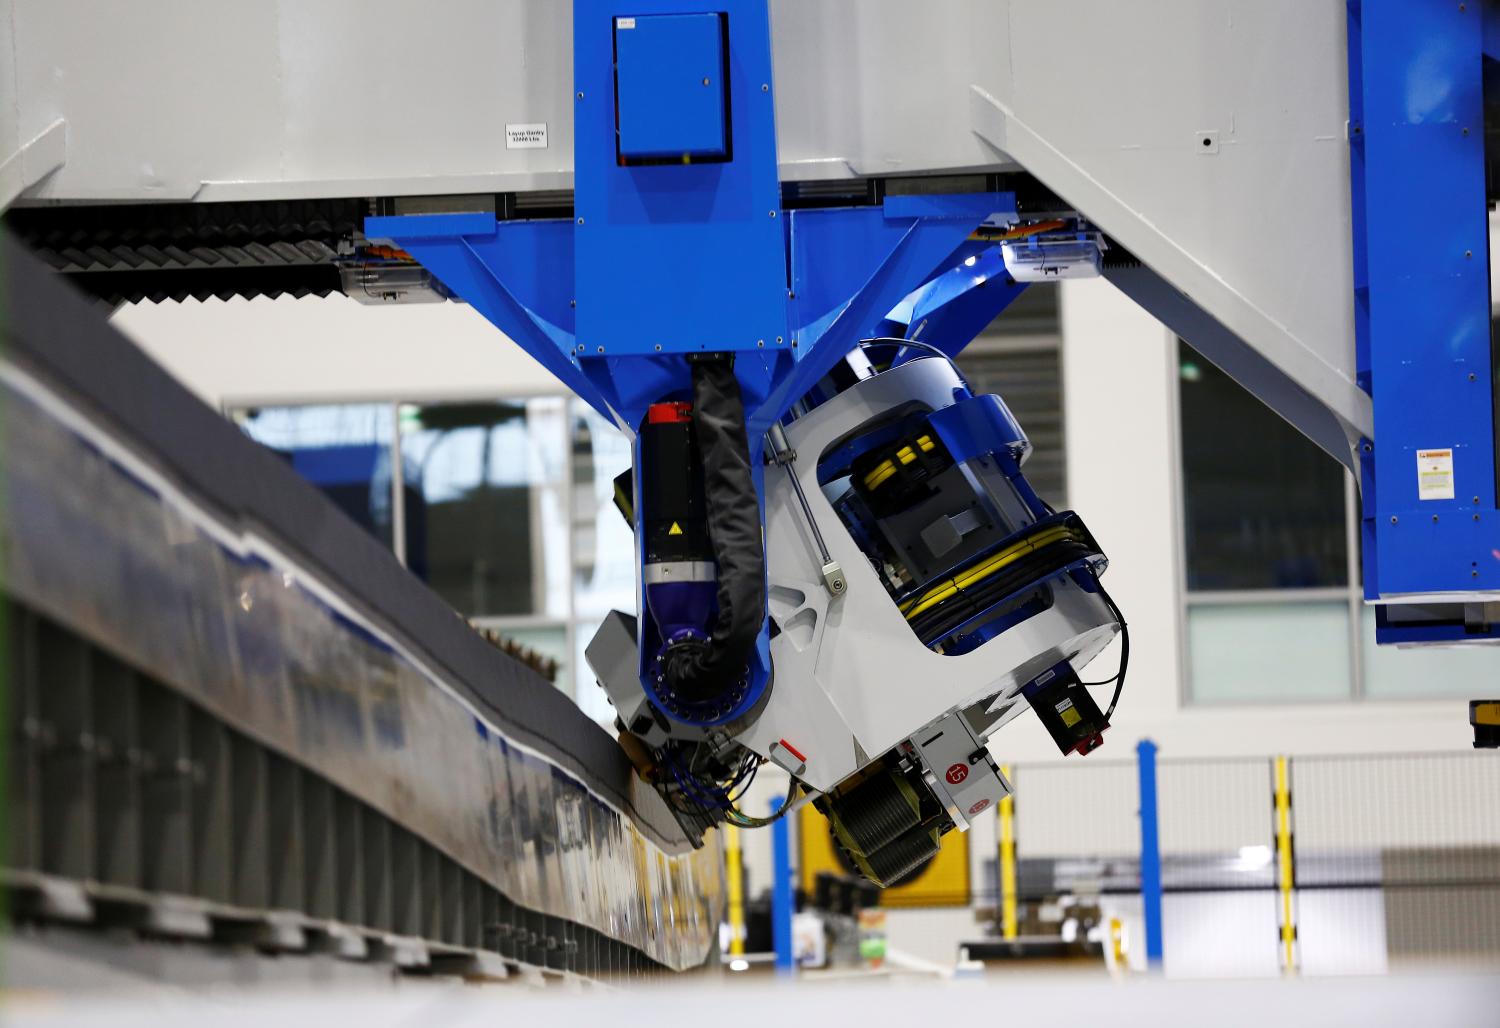 An electroimpact automated fiber placement machine, which lays down carbon fiber strips onto the 777X spar, seen during a media tour of the Boeing 777X at the Boeing Composite Wing Center in Everett, Washington, U.S., February 27, 2019. Picture taken February 27, 2019.  REUTERS/Lindsey Wasson - RC1B1FA69A40